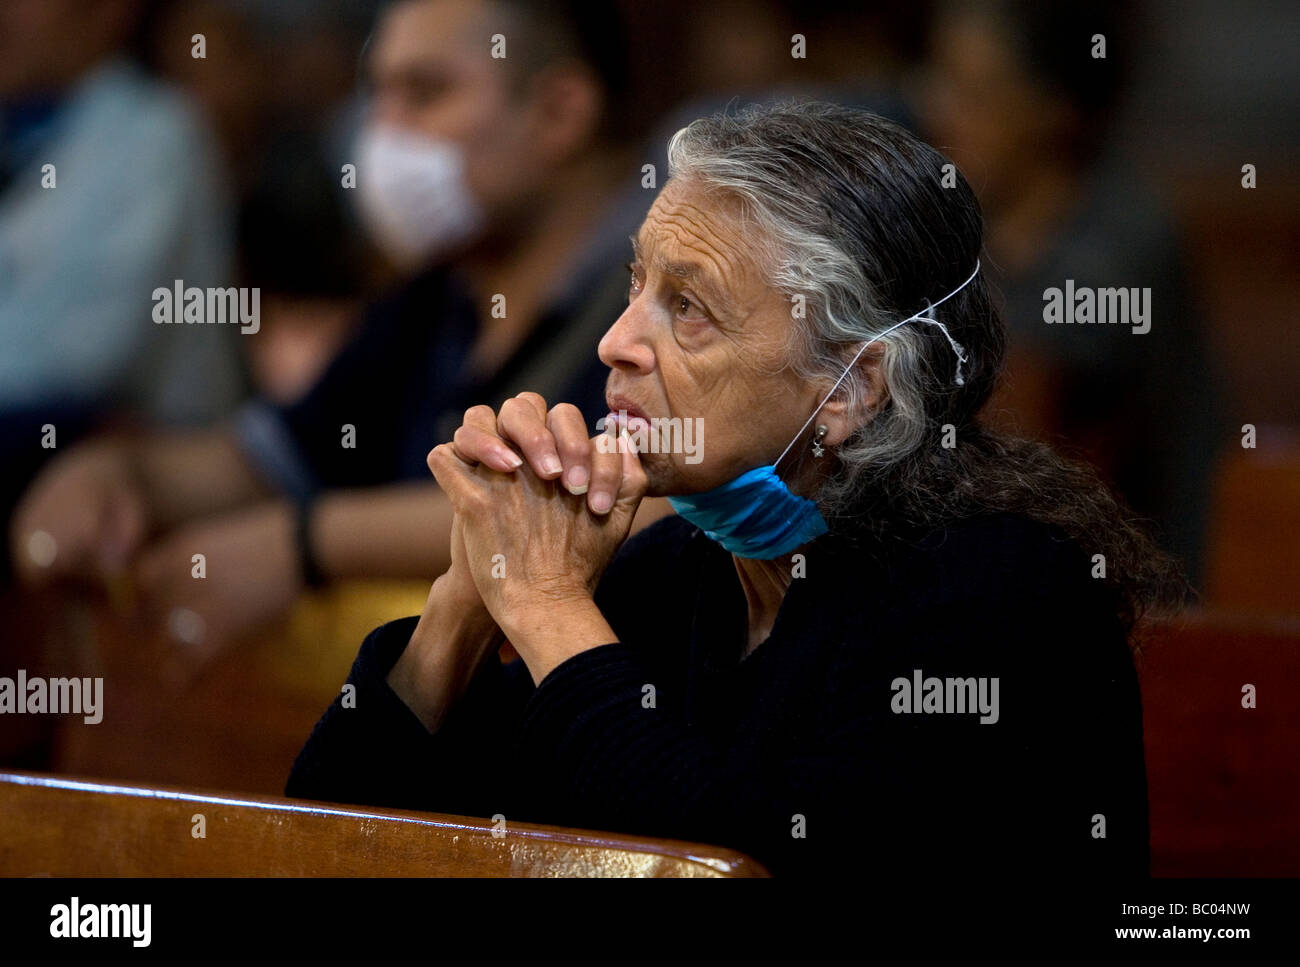 A woman wears a mask as a precaution against swine flu prays in Mexico City's Metropolitan Cathedral. Stock Photo